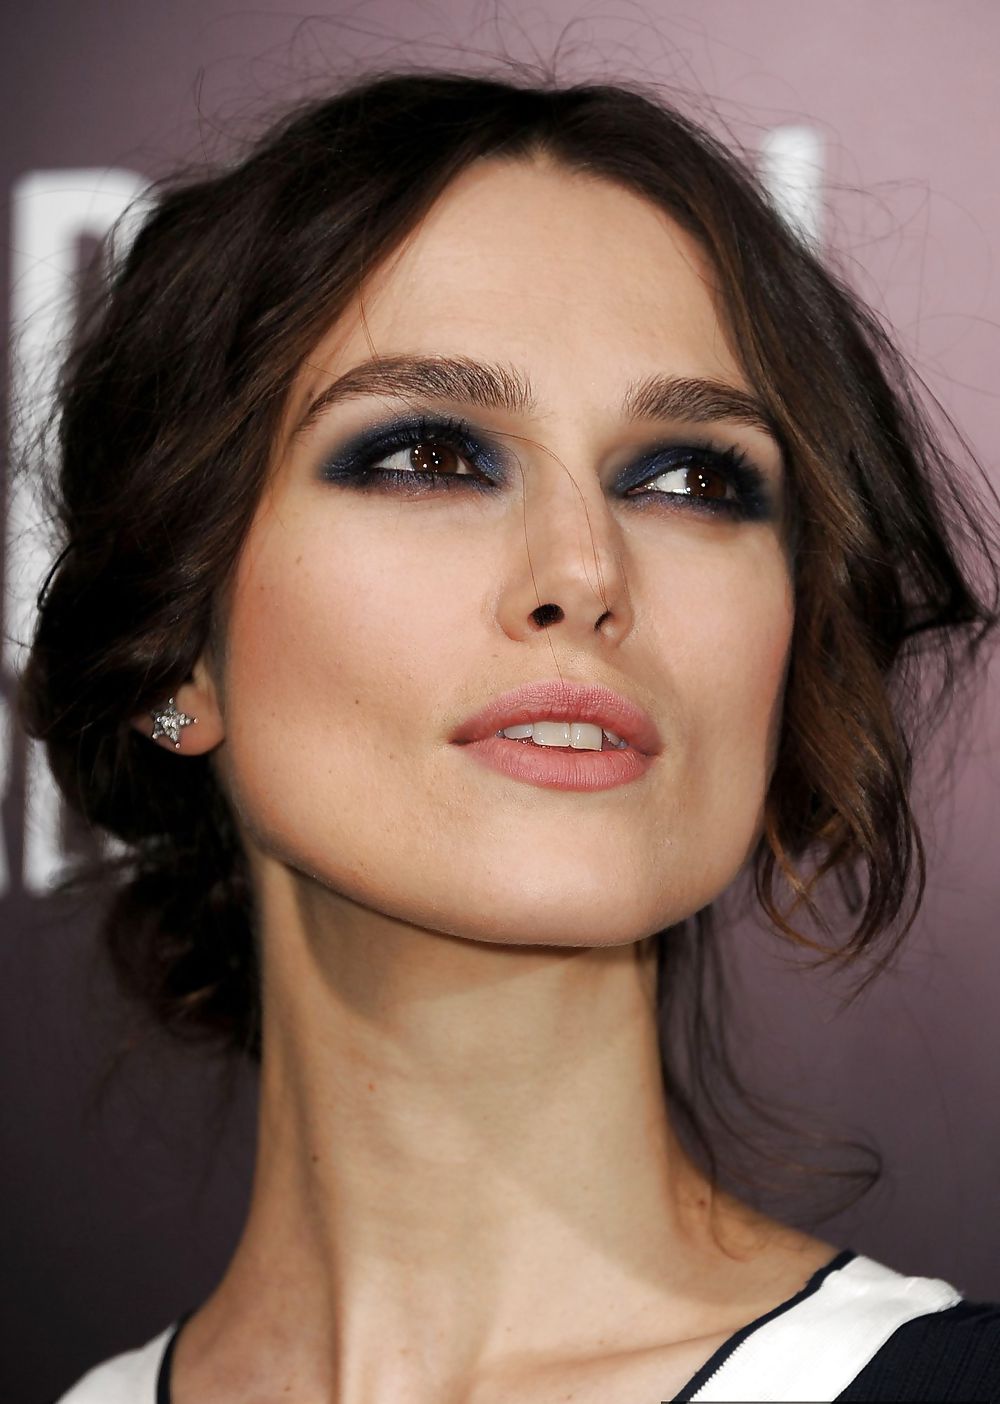 Keira Knightley The Royal Lady of England #35650197